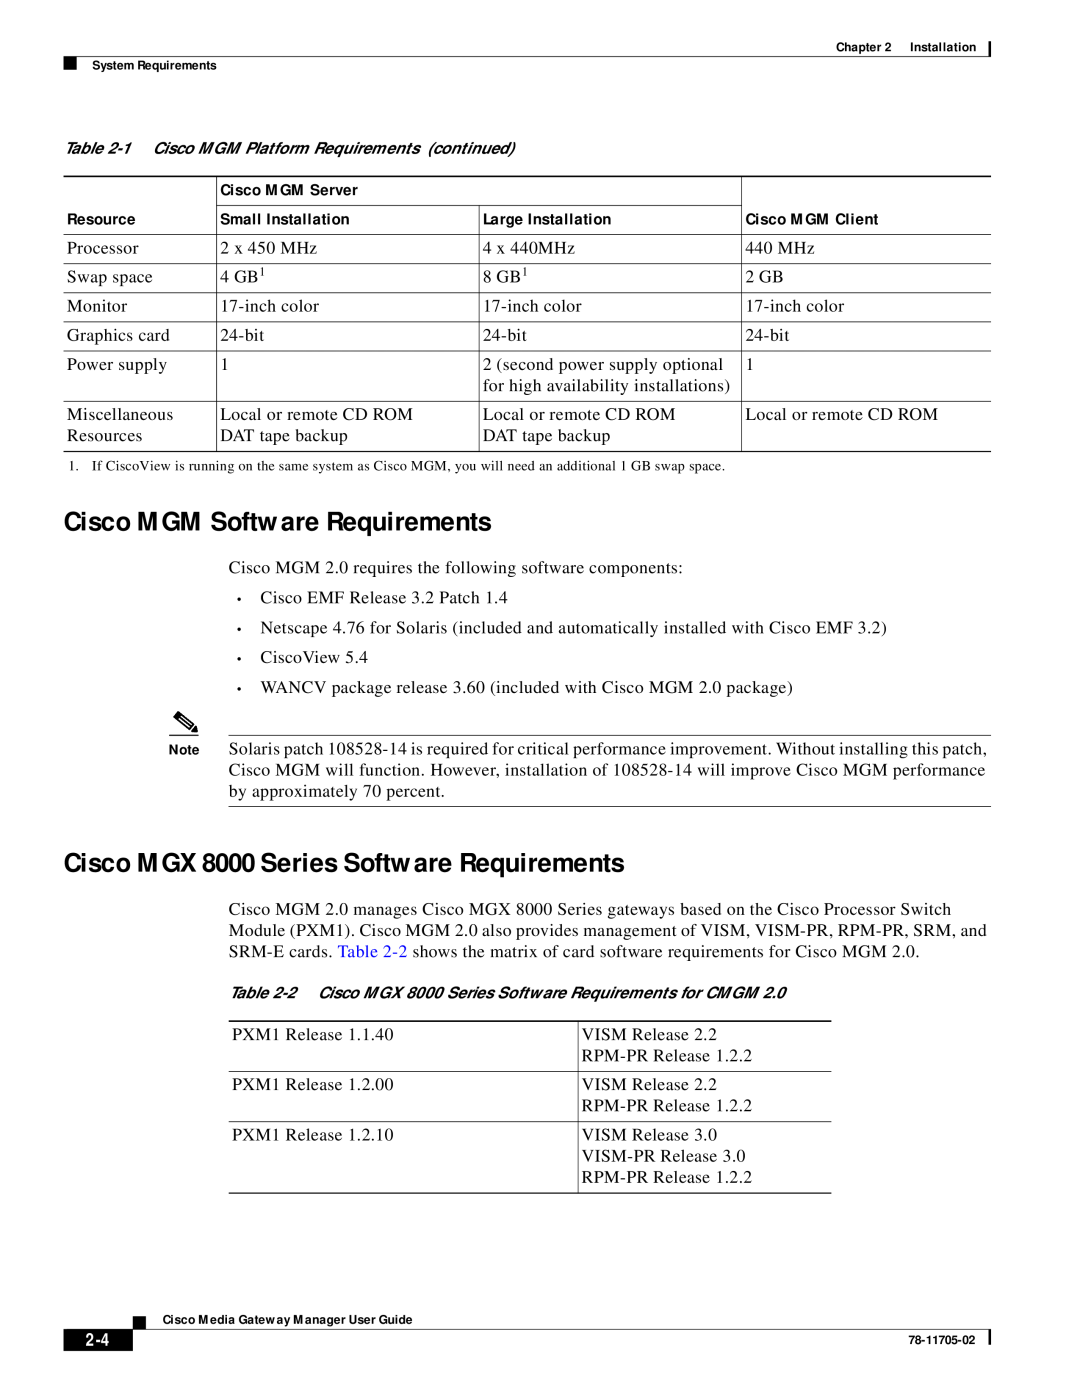 Cisco Systems Cisco MGM Software Requirements, Cisco MGX 8000 Series Software Requirements, Cisco MGM Server, Resource 